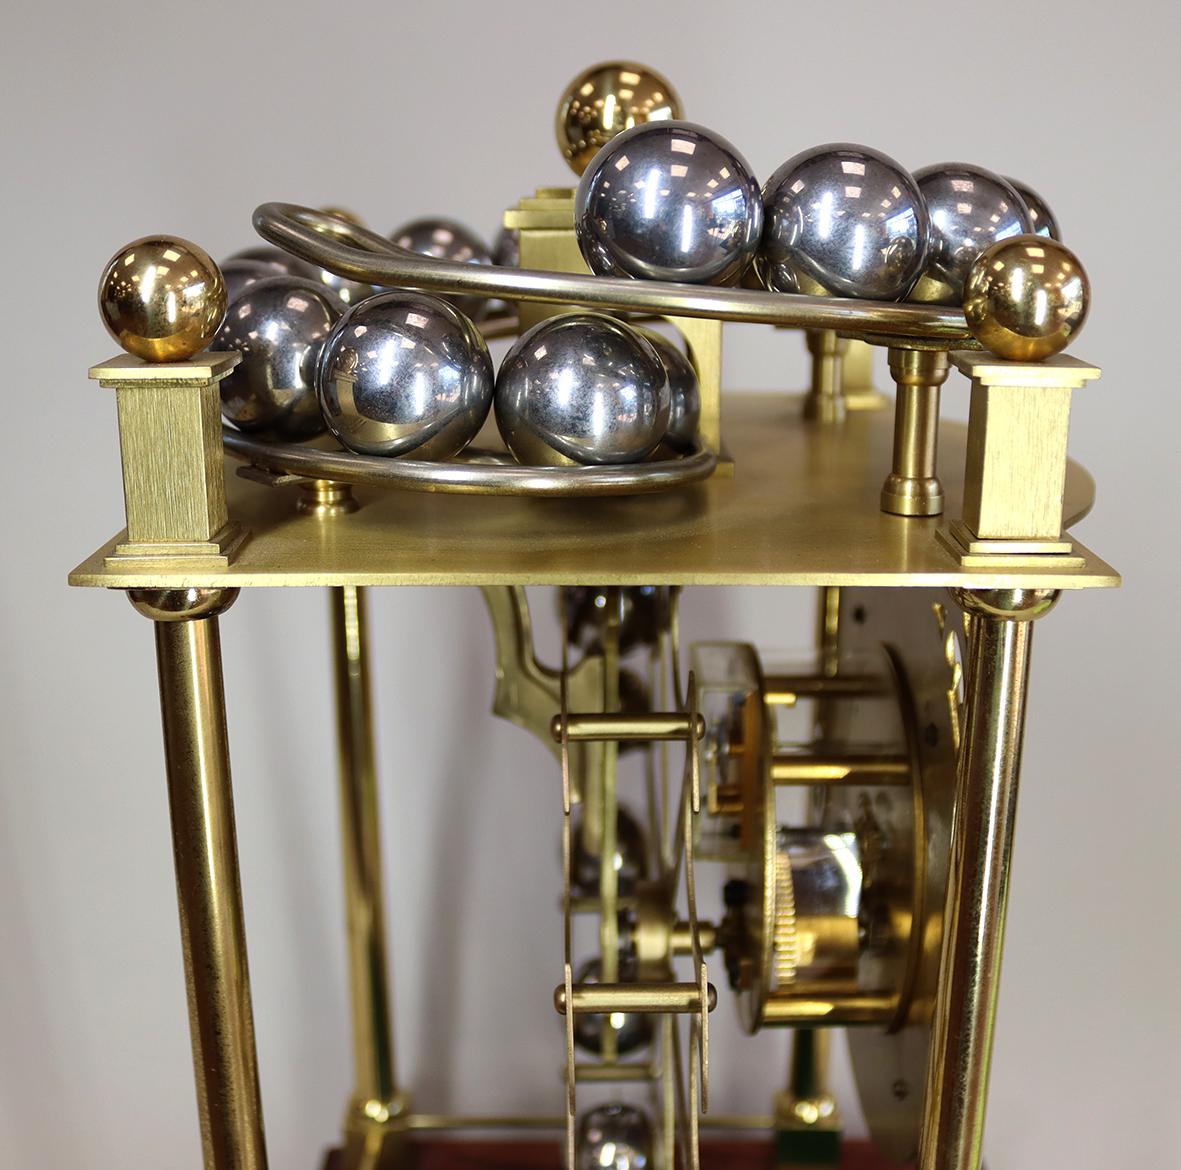 A Harding and Bazeley Limited Edition Spherical Weight Clock In Good Condition For Sale In Amersham, GB